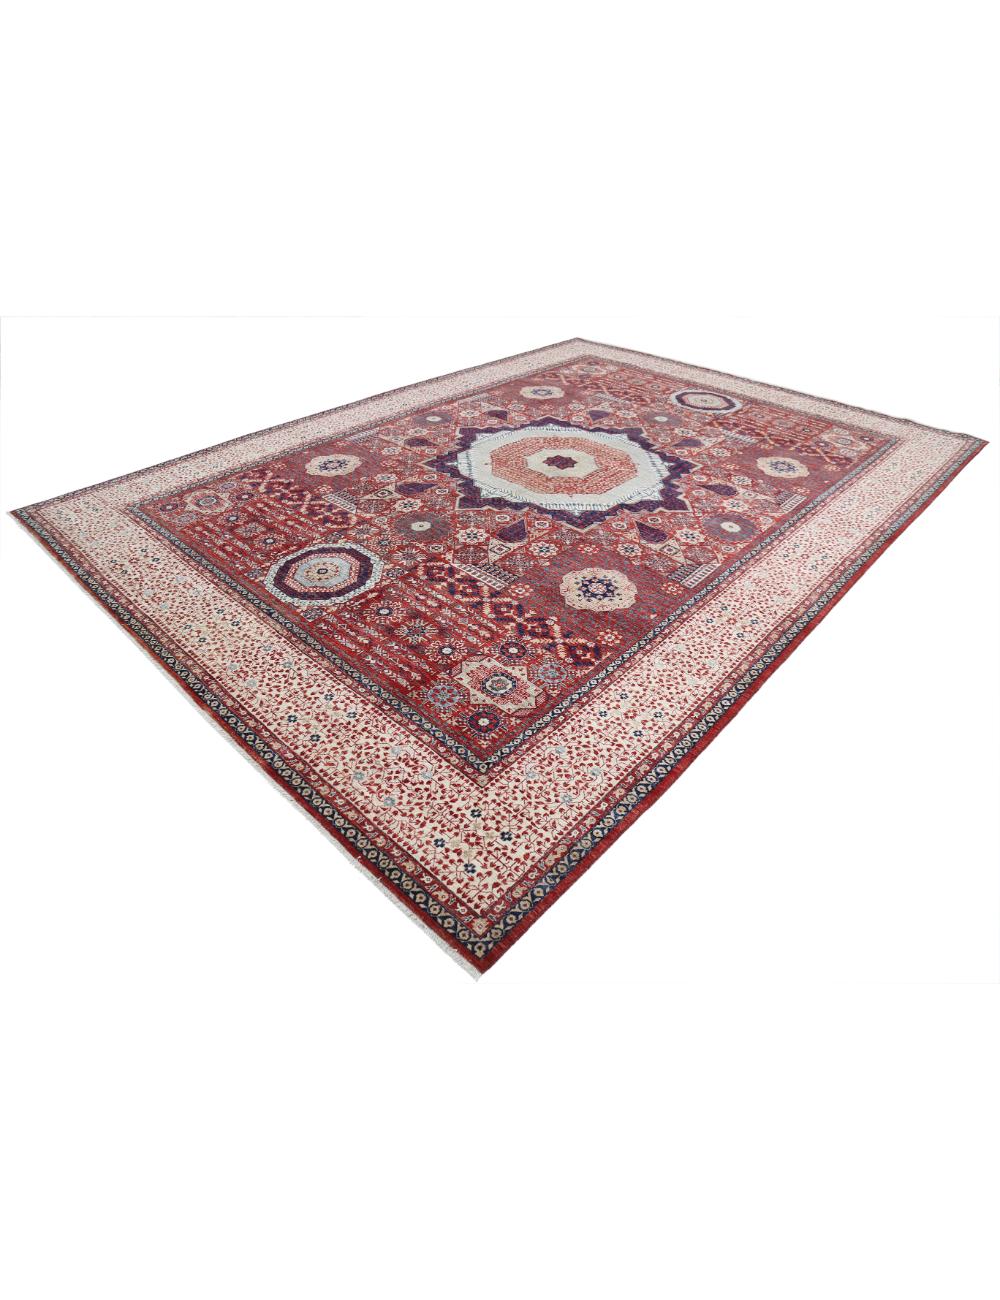 Mamluk 10' 1" X 13' 9" Hand-Knotted Wool Rug 10' 1" X 13' 9" (307 X 419) / Red / Ivory